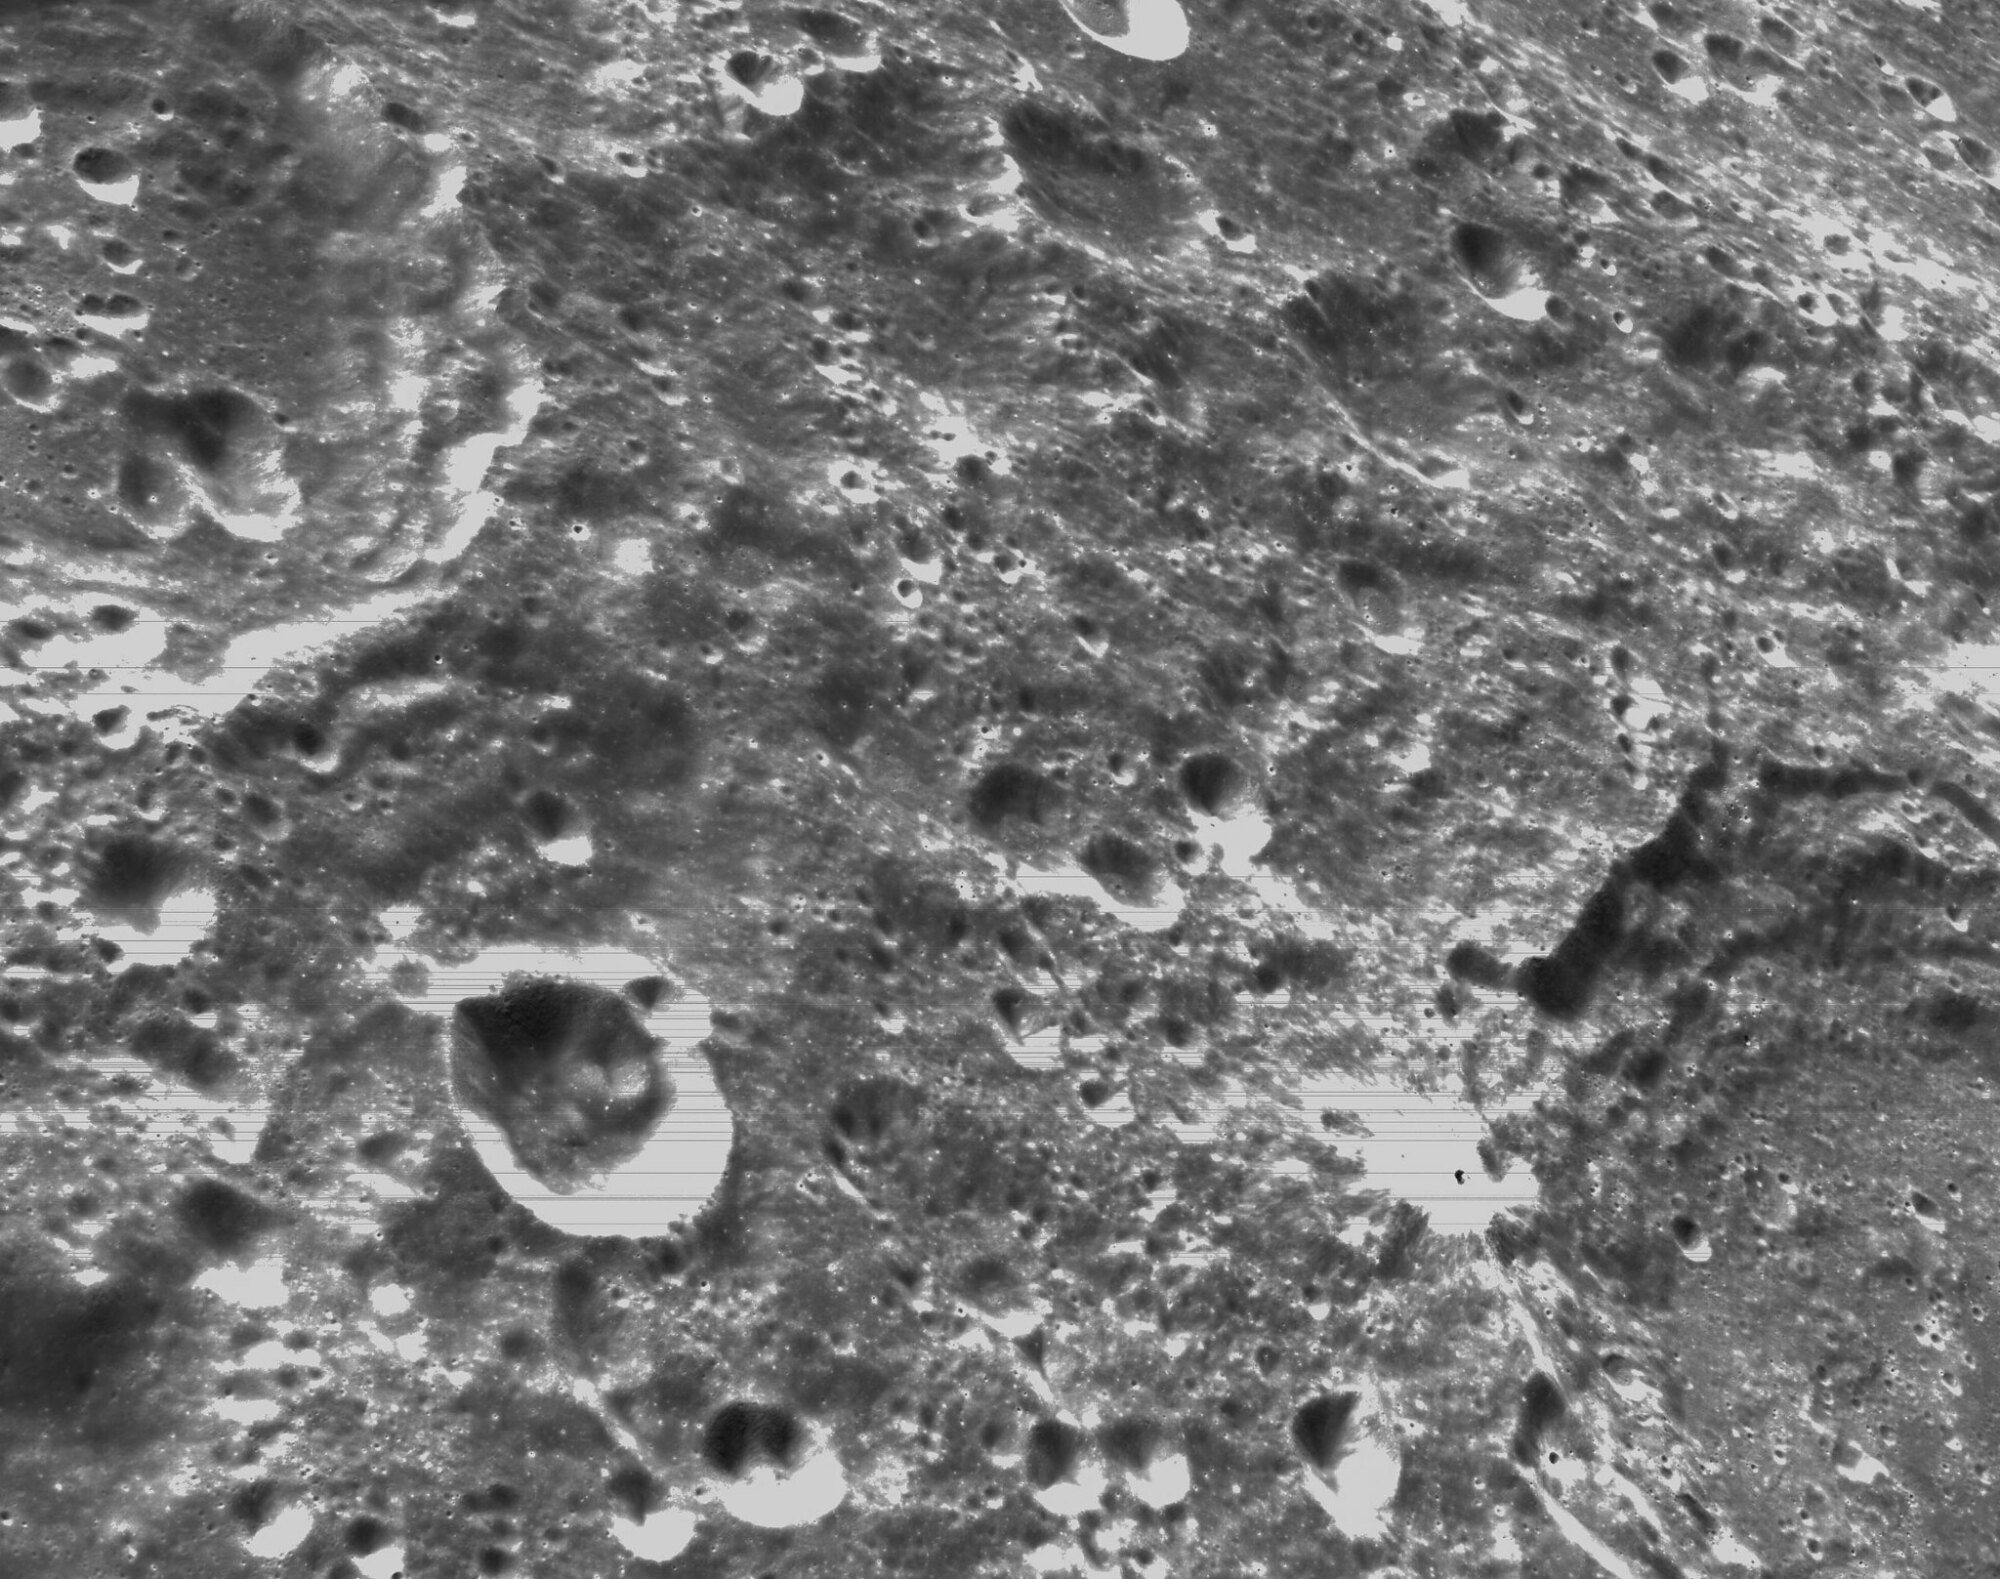 the moon's cratered surface